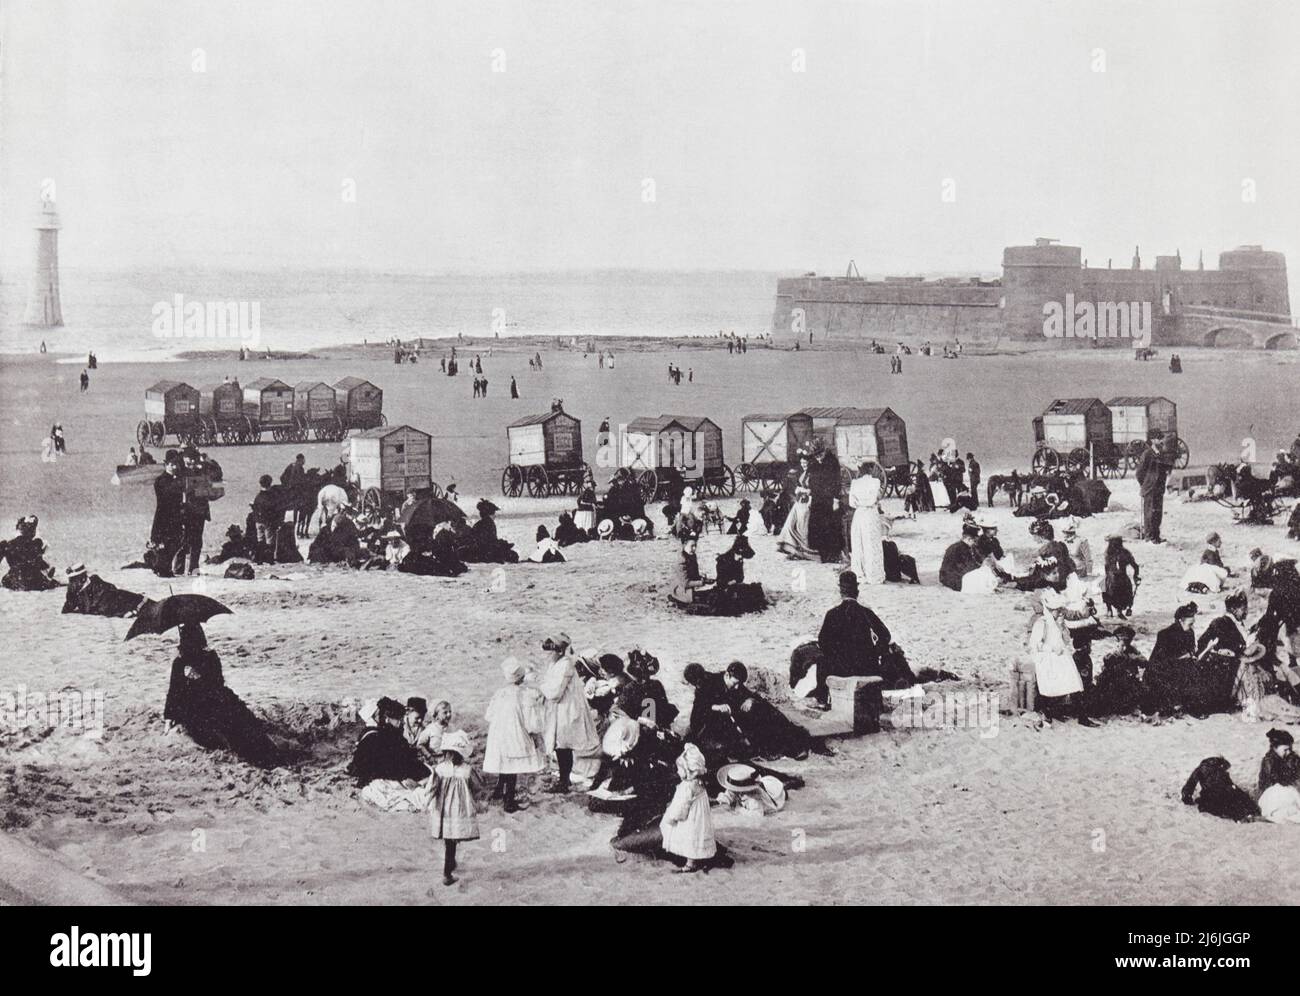 New Brighton, Wallasey, Merseyside, England, showing the fort and the lighthouse in the 19th century.  From Around The Coast,  An Album of Pictures from Photographs of the Chief Seaside Places of Interest in Great Britain and Ireland published London, 1895, by George Newnes Limited. Stock Photo